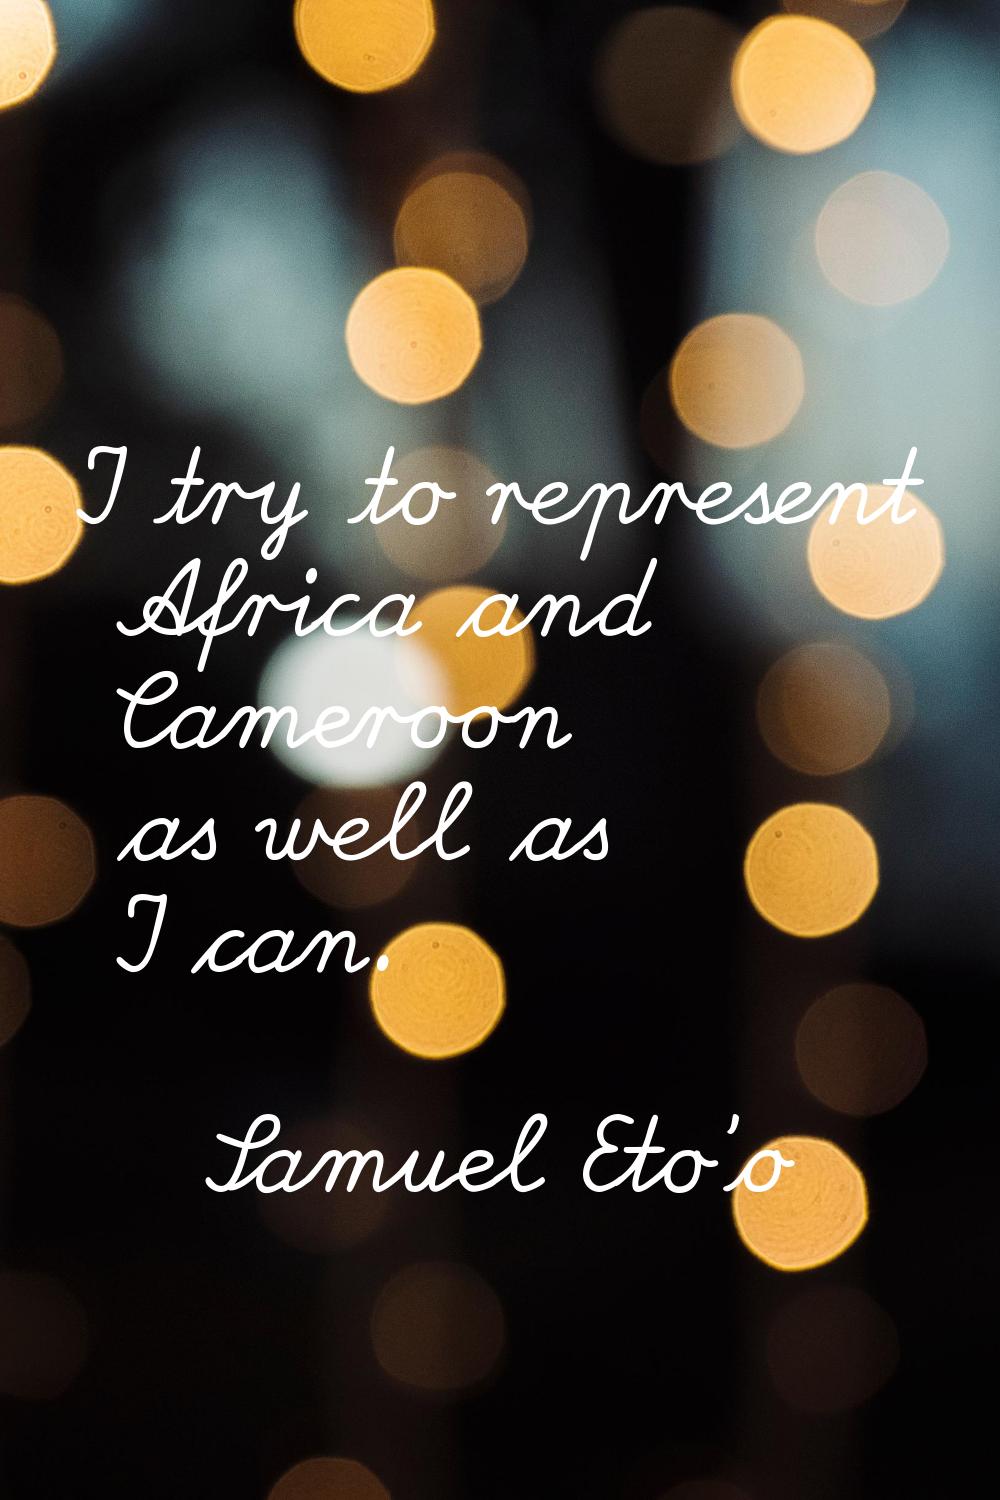 I try to represent Africa and Cameroon as well as I can.